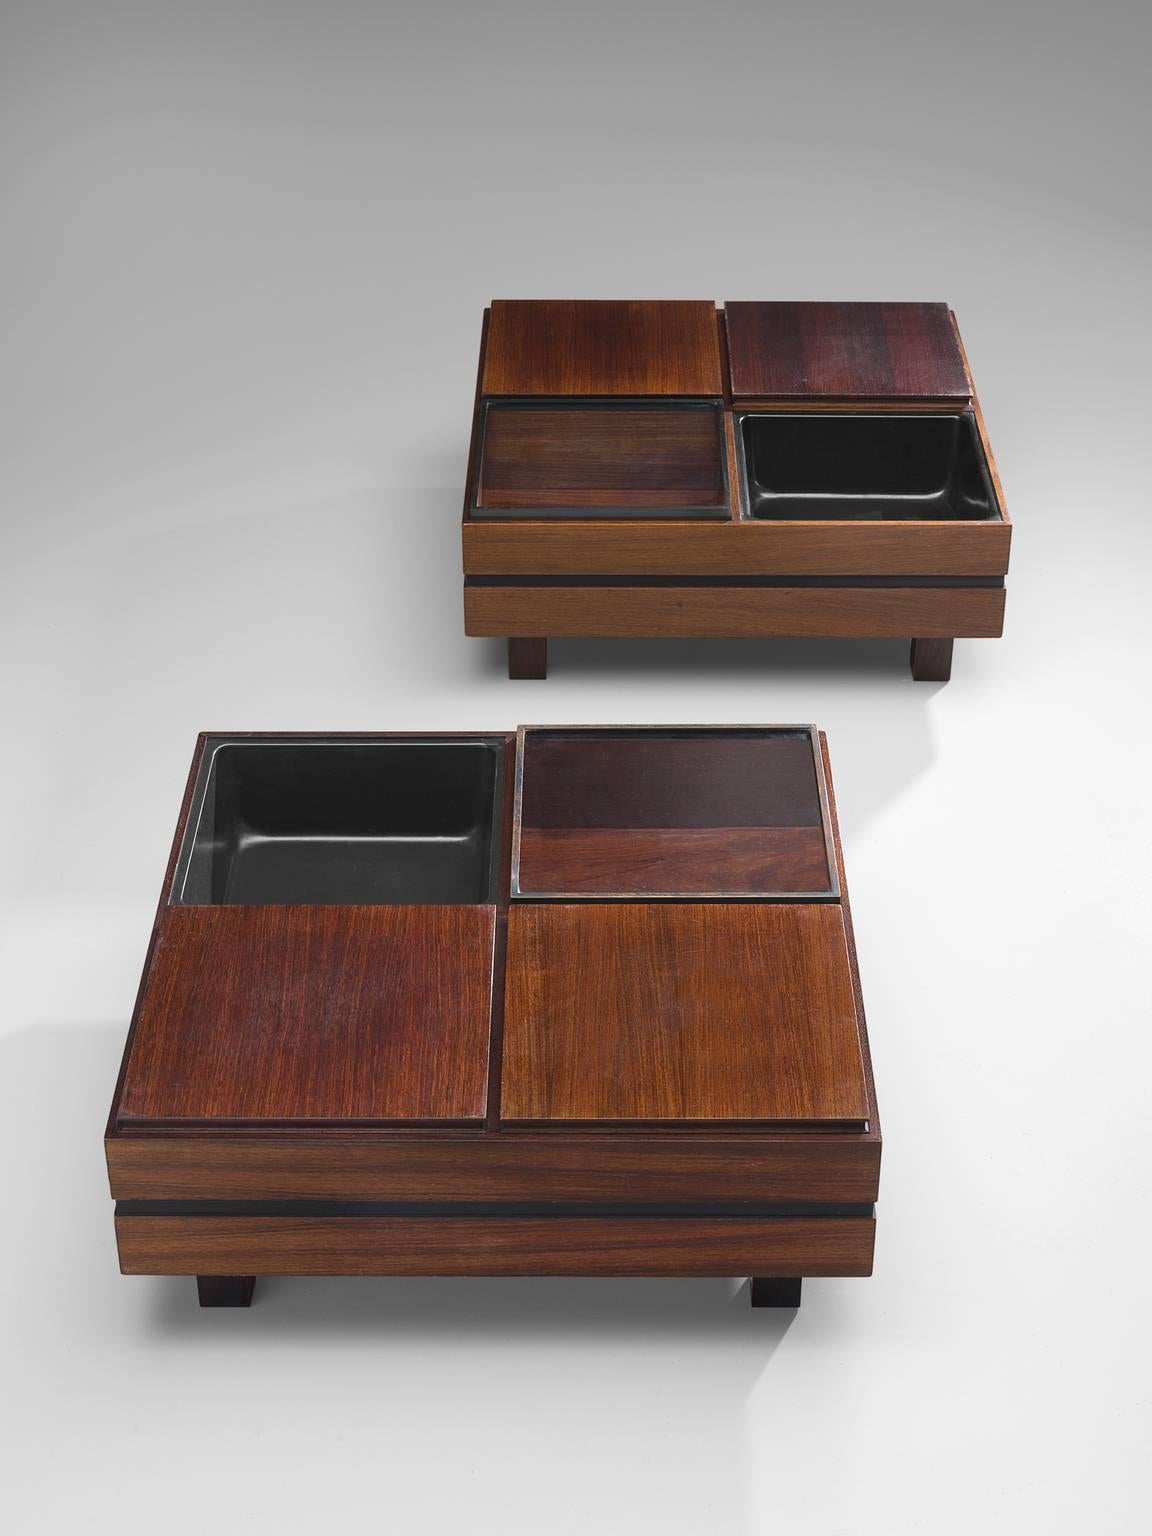 Produced by Sormani, pair of coffee tables, wood, glass, Italy, 1960s.

Architectural pair of side tables executed with four square elements each. The tables consist of a one empty element, one glass element and two wooden elements. The base of